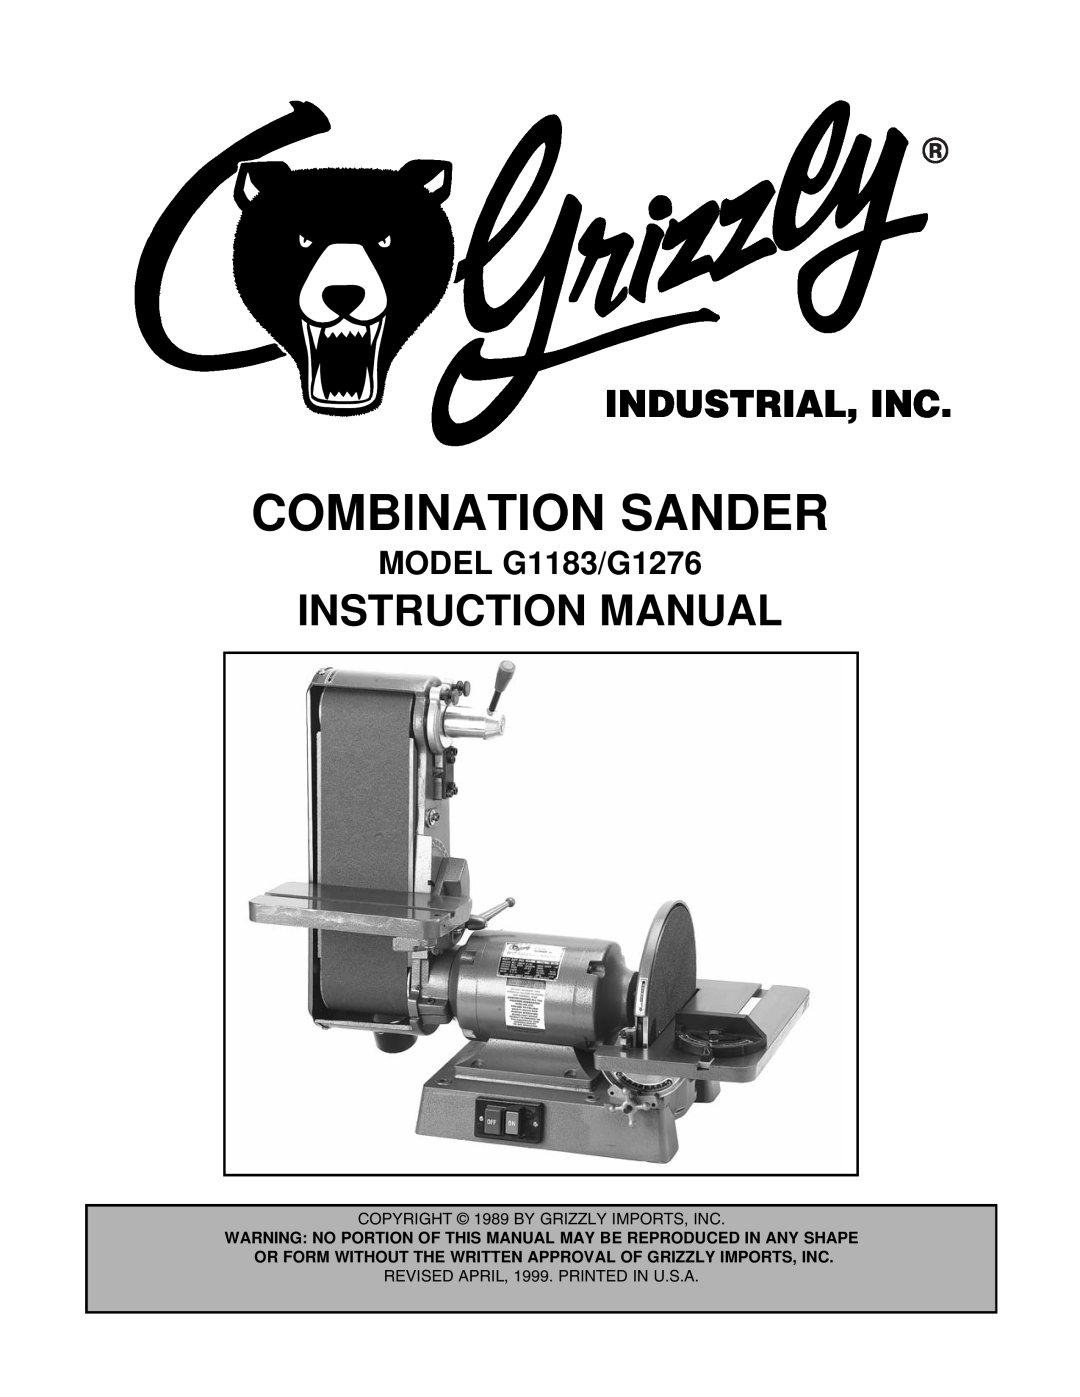 Grizzly instruction manual Instruction Manual, MODEL G1183/G1276, Combination Sander 